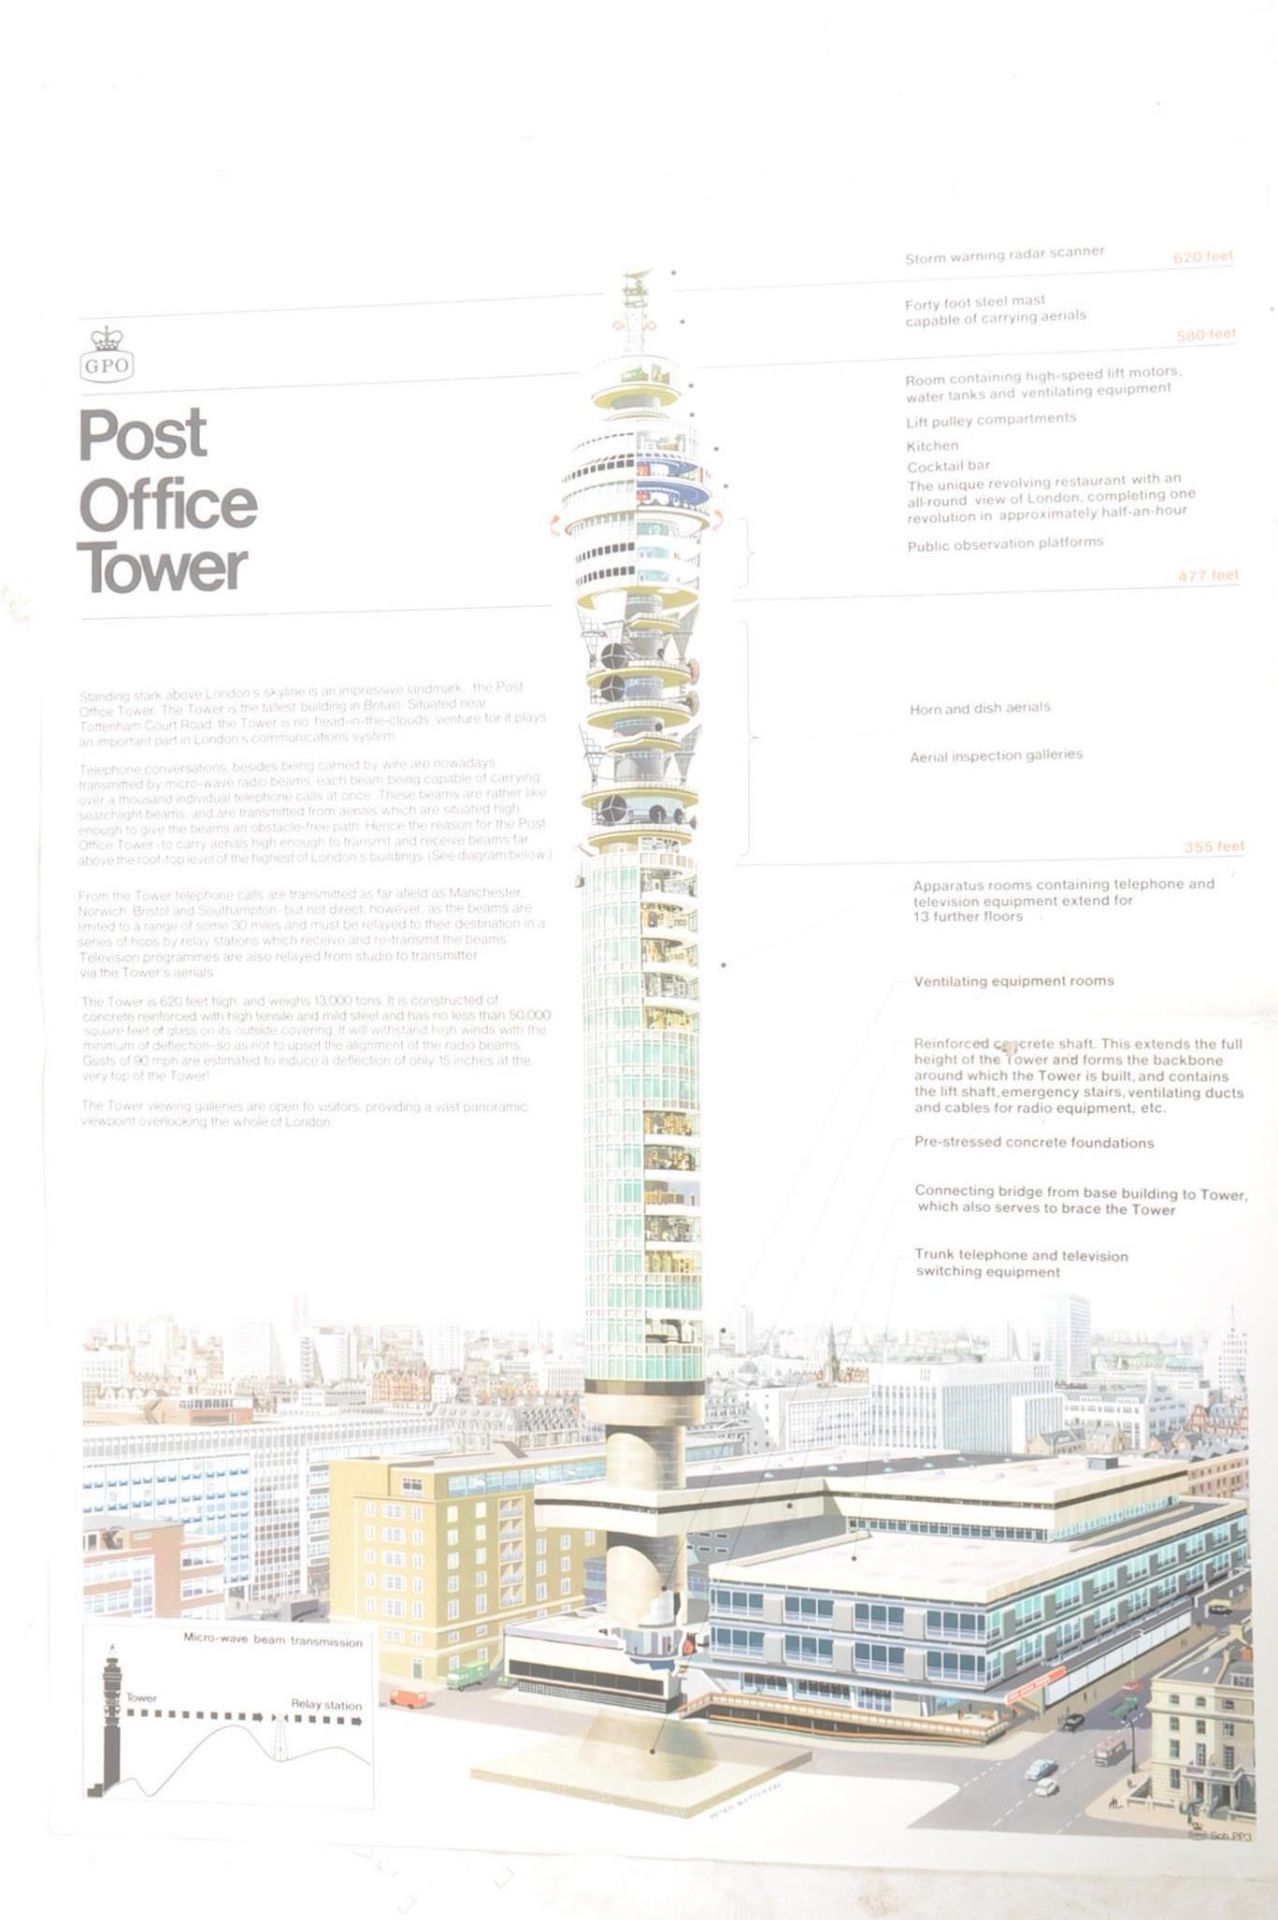 GPO - ADVERTISING 1970s RETRO POST OFFICE TOWER POSTER